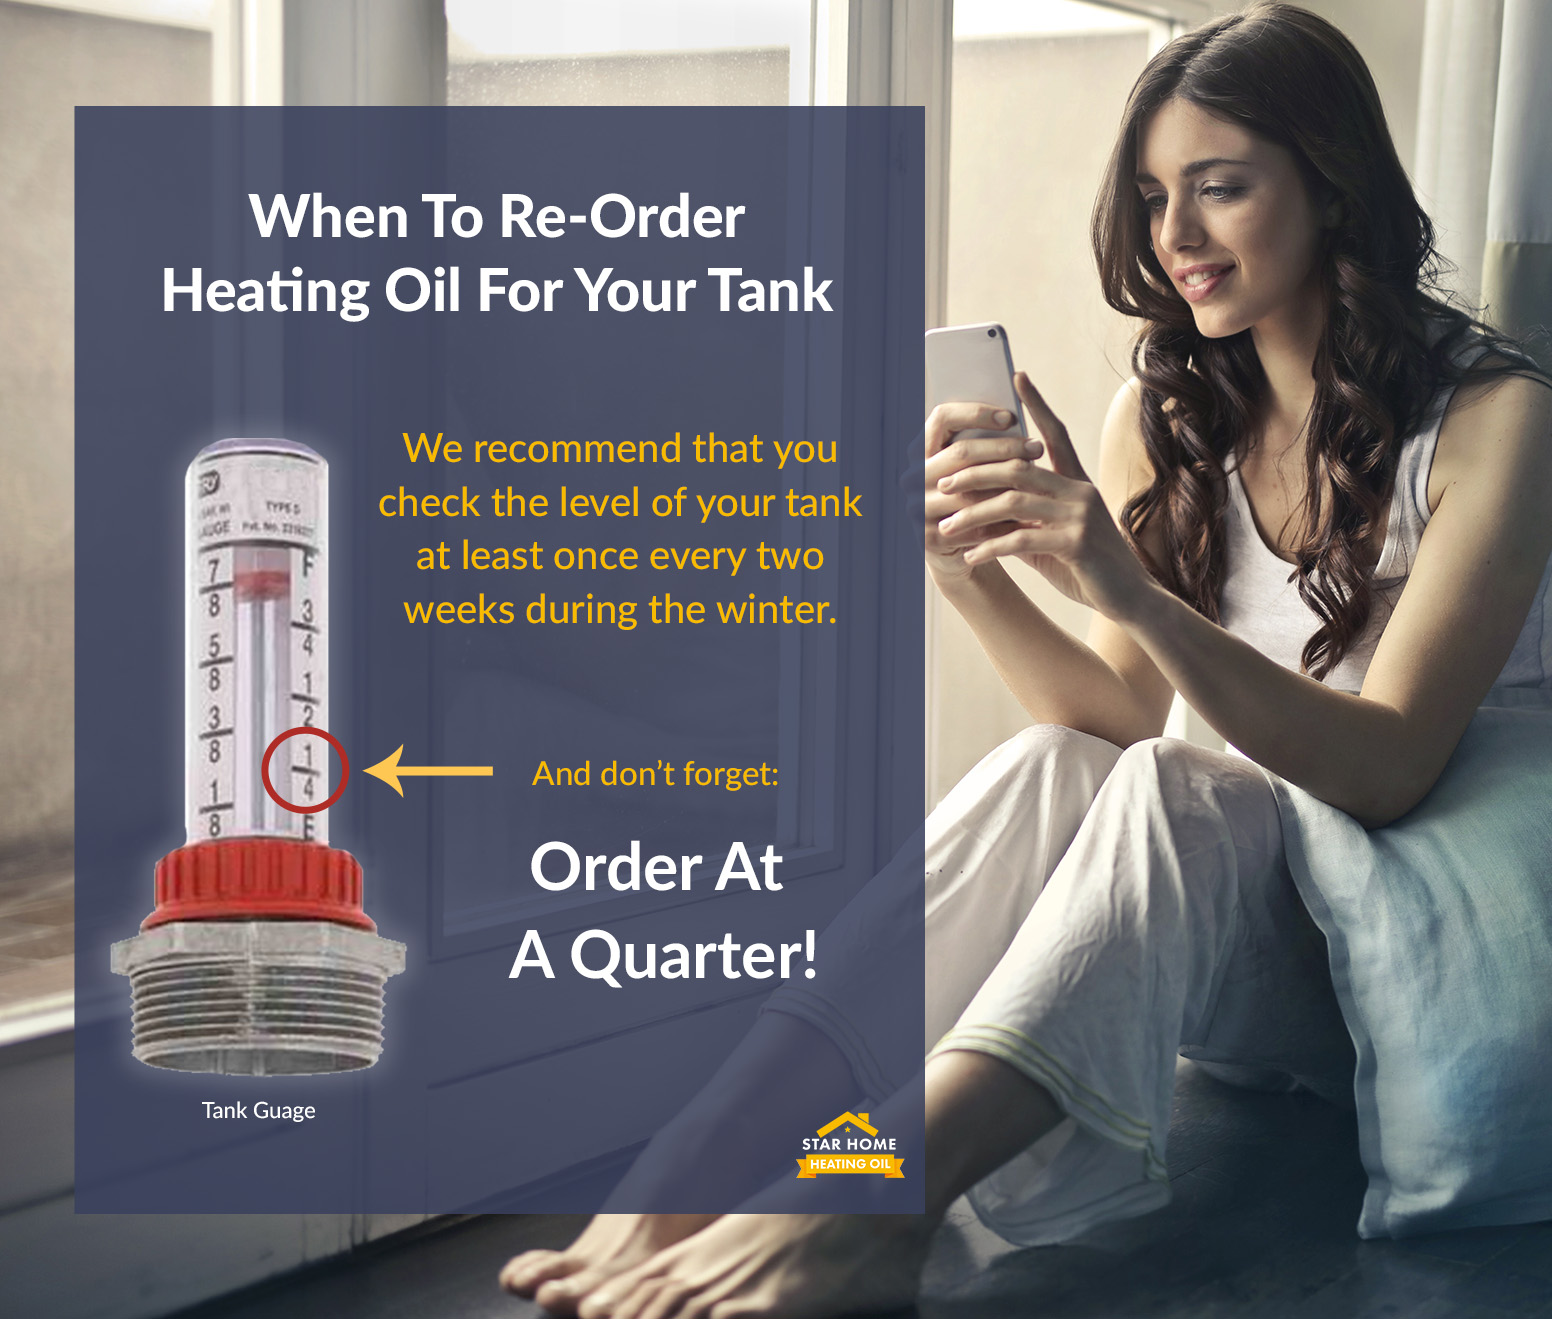 When to Re-Order Heating Oil